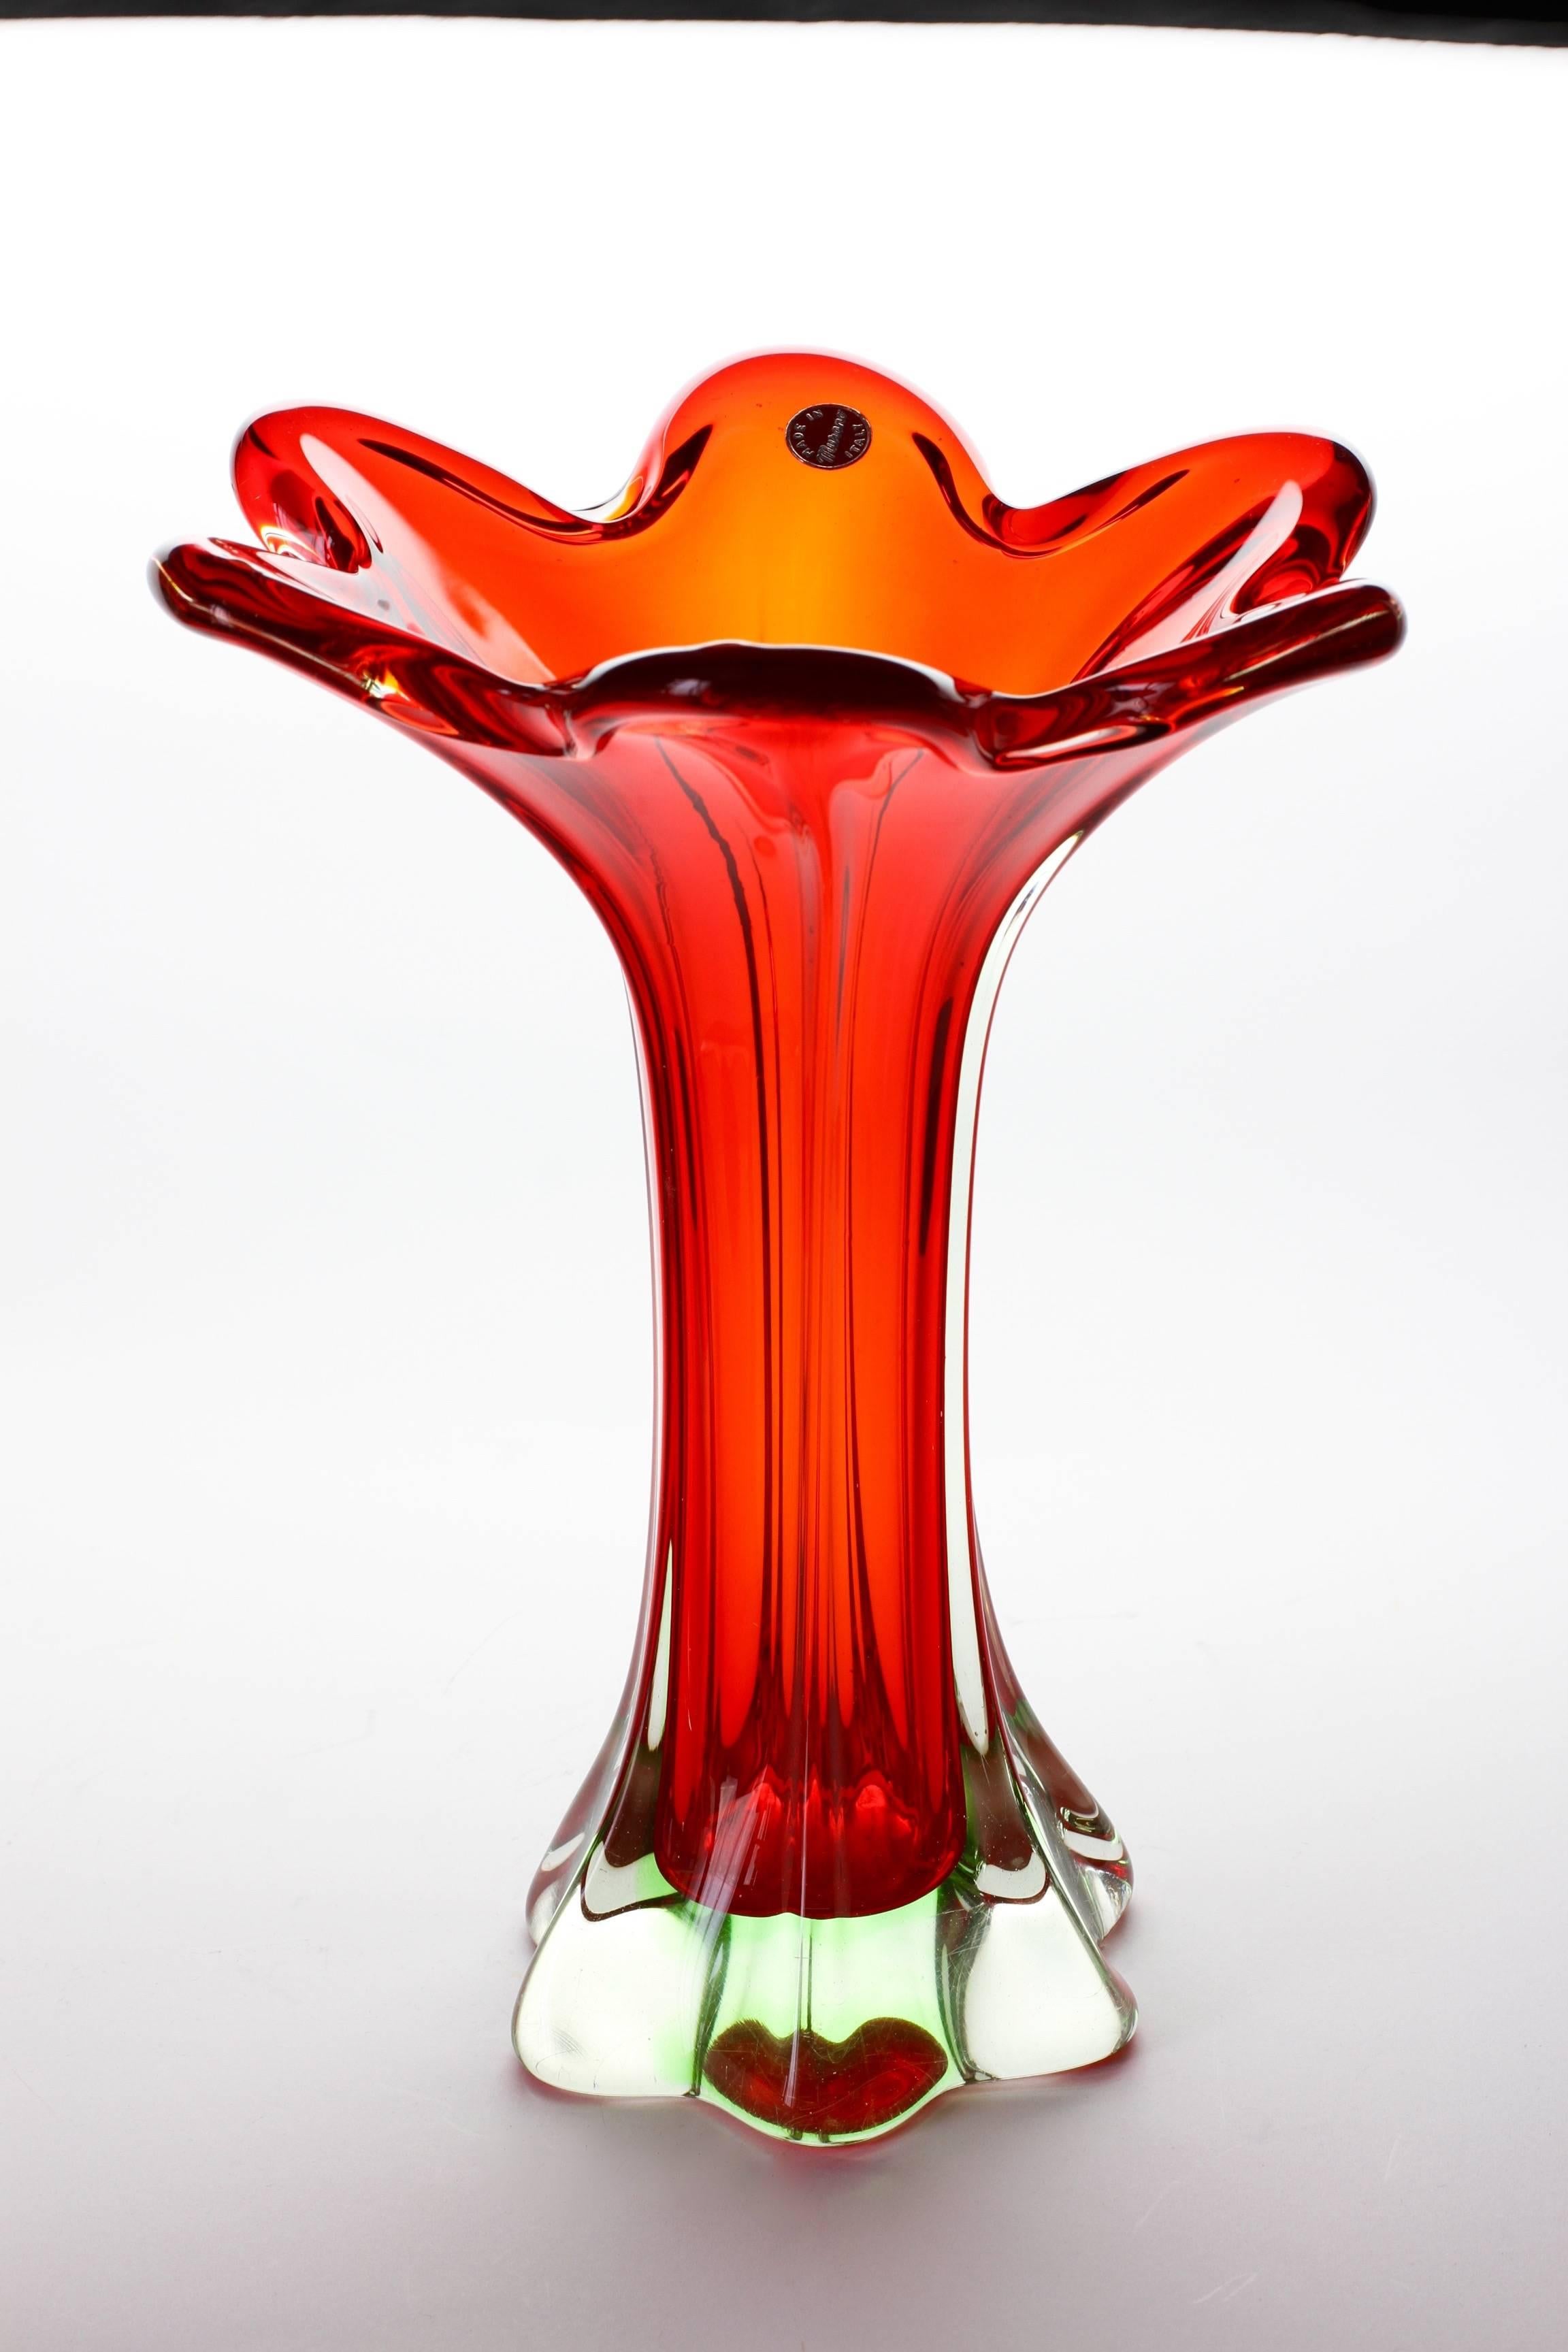 A wonderful tall Murano vase of red and green sommerso glass. This piece is huge at almost twelve inches tall. A wonderful statement piece and would look exceptional as a centrepiece filled with beautiful flowers or on display on a shelf or in a